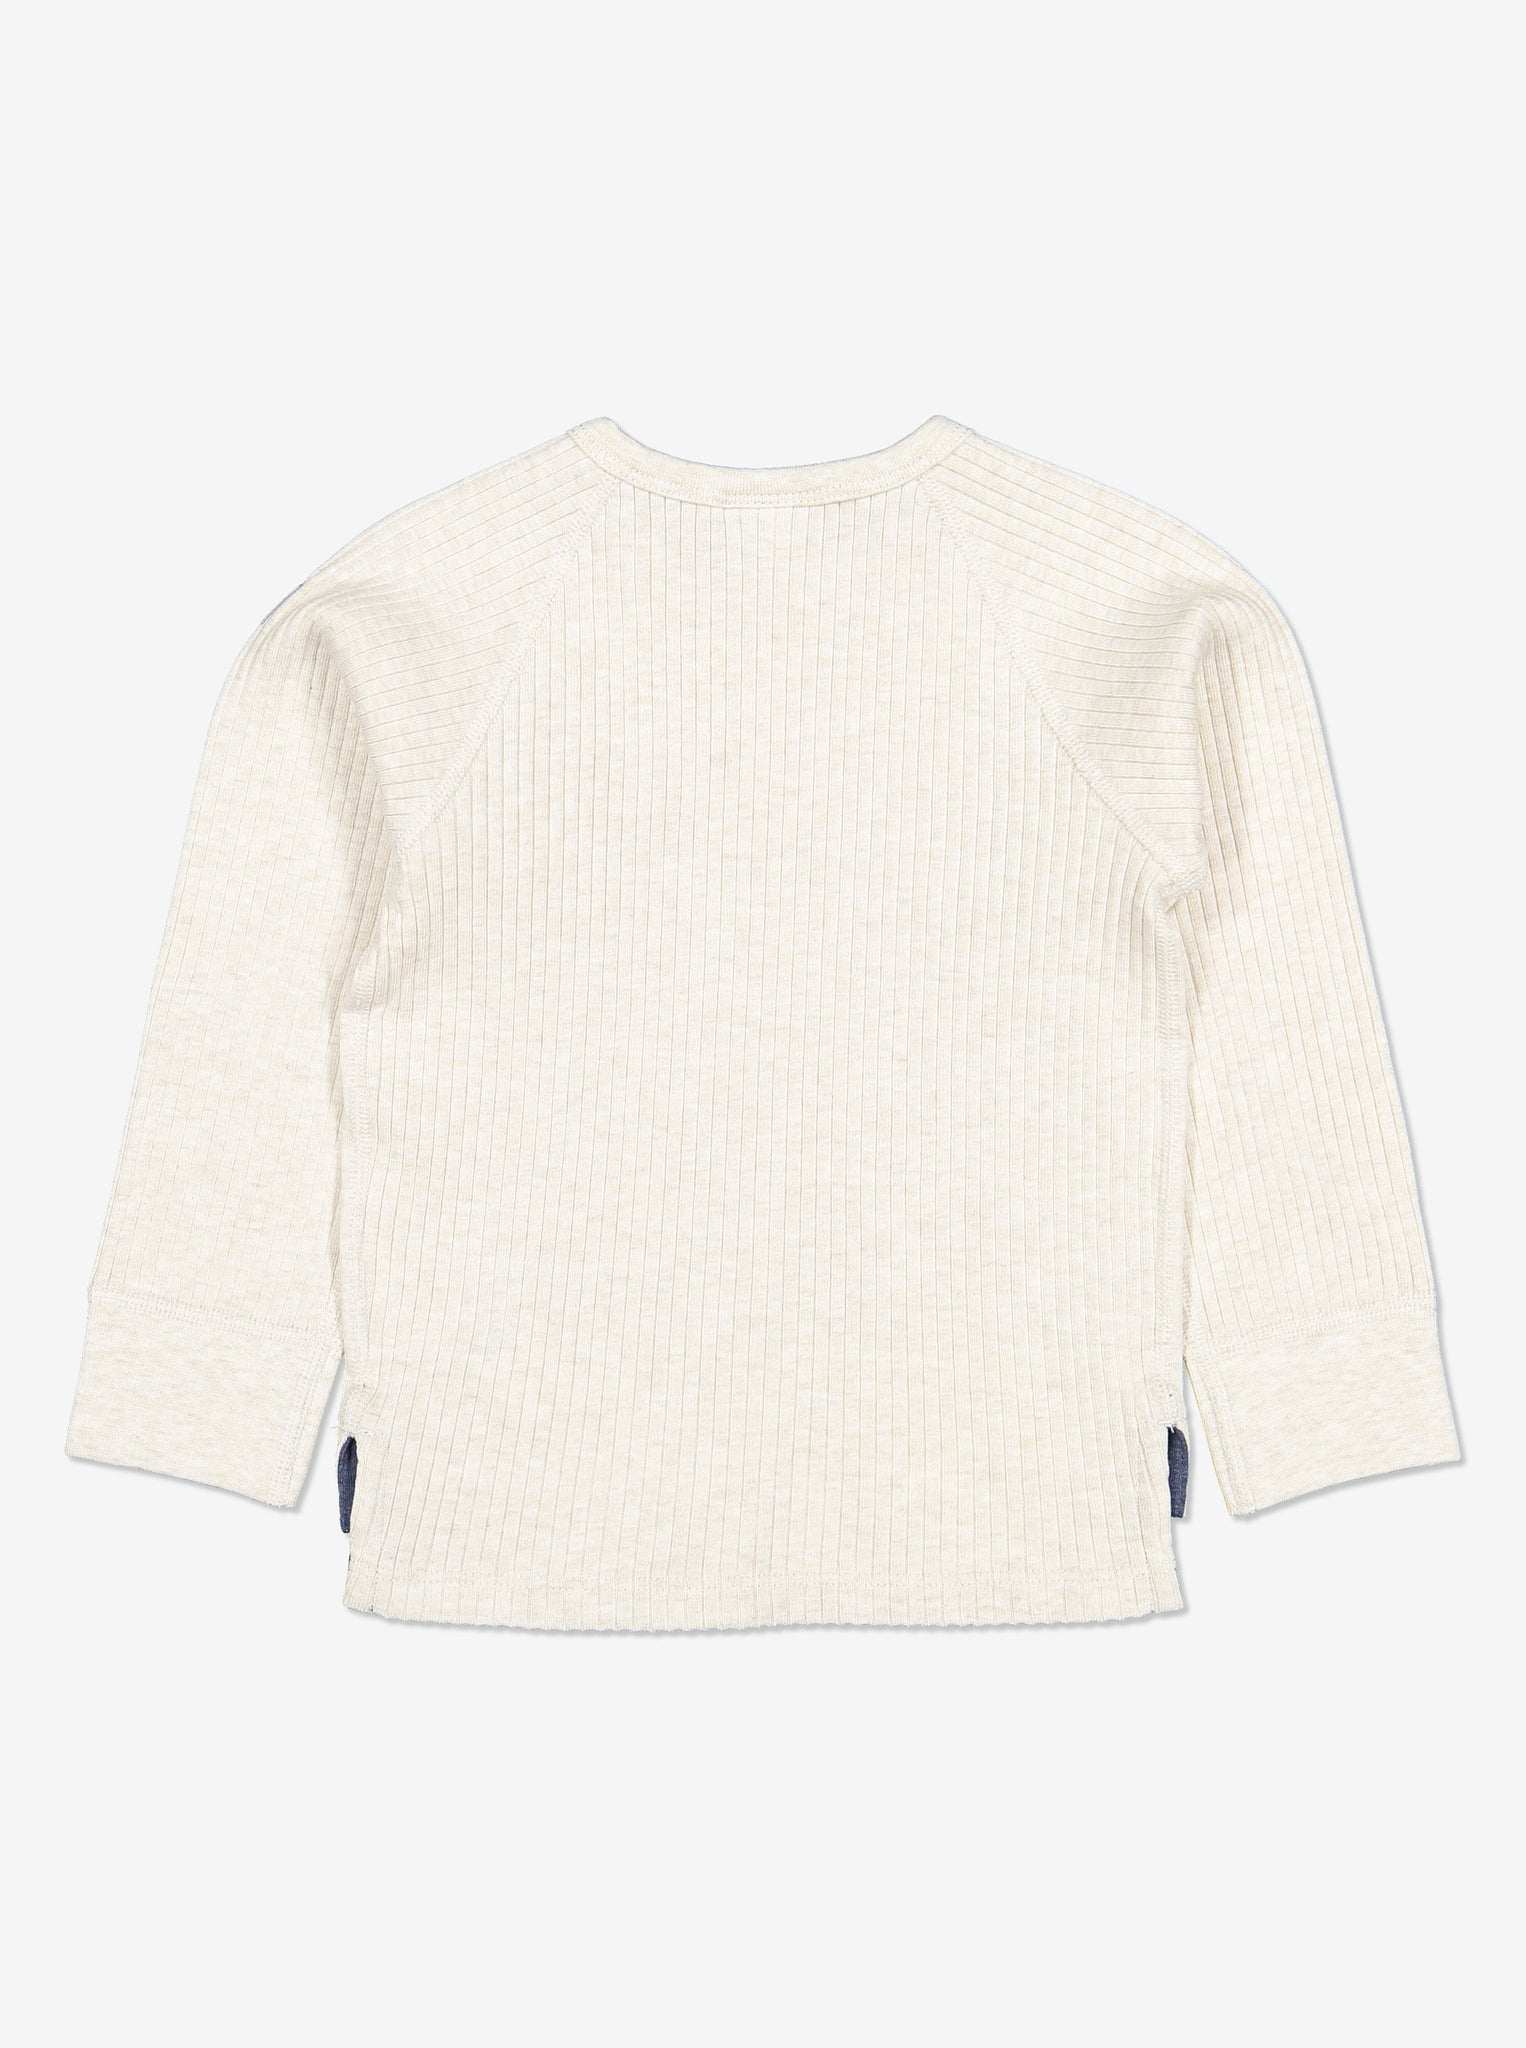 Ribbed Baby Top-Unisex-6m-1y-White